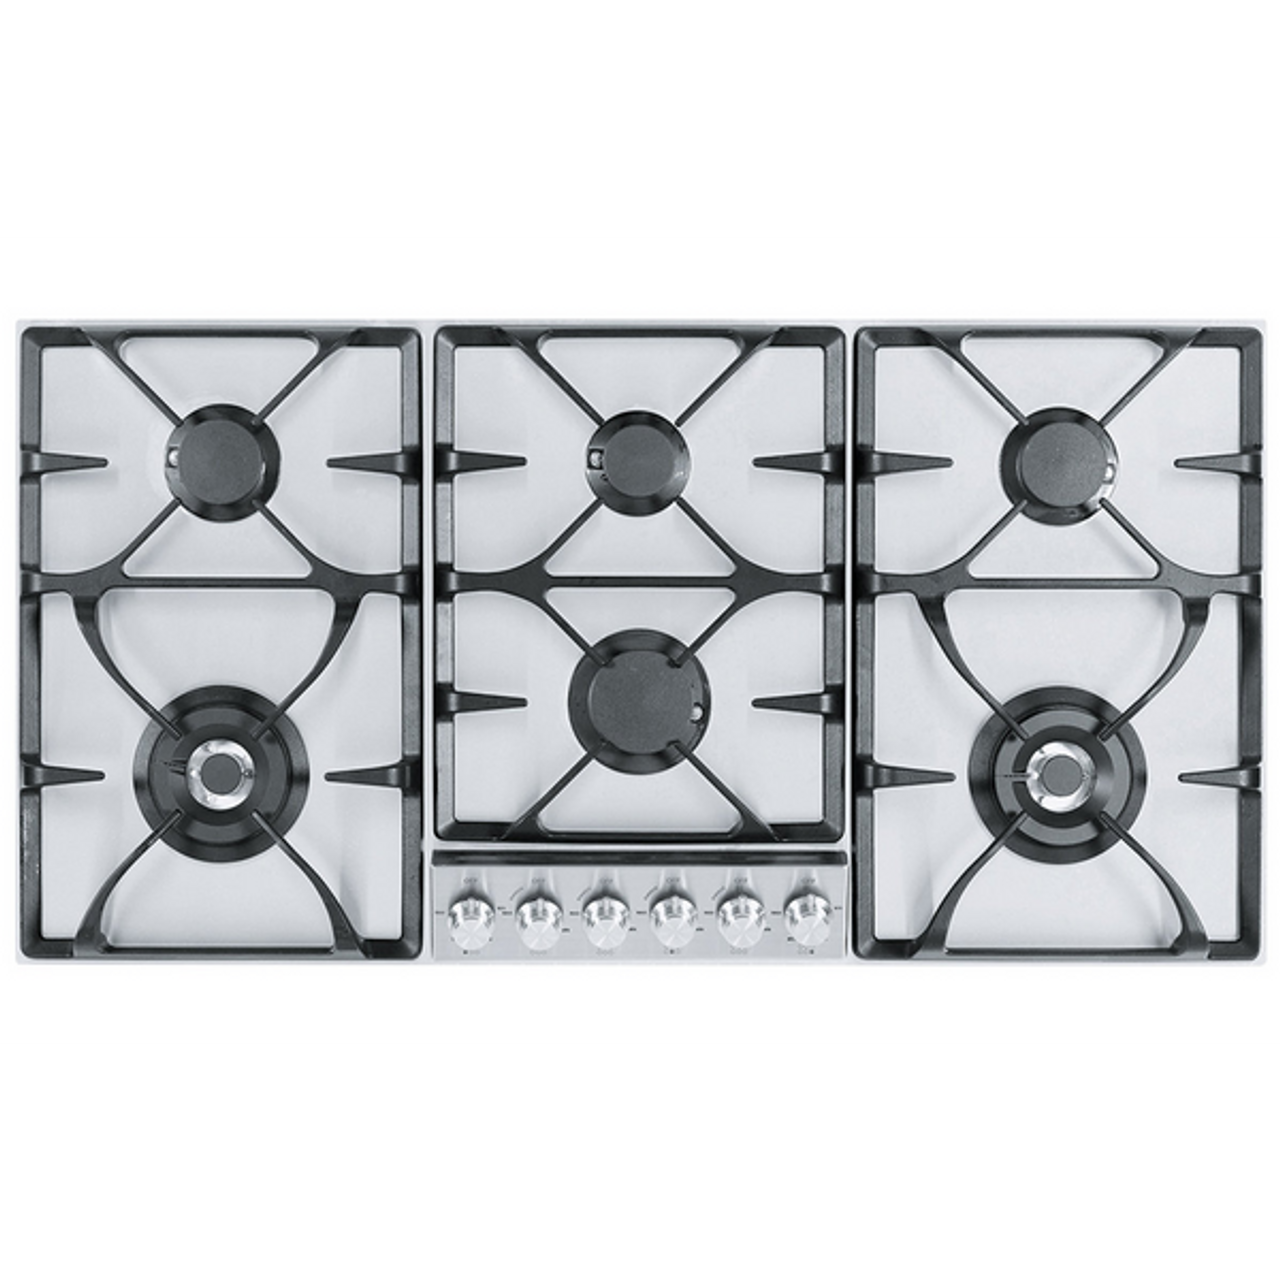 FIG906S1N - 99cm Professional Series Natural Gas Cooktop - Stainless Steel